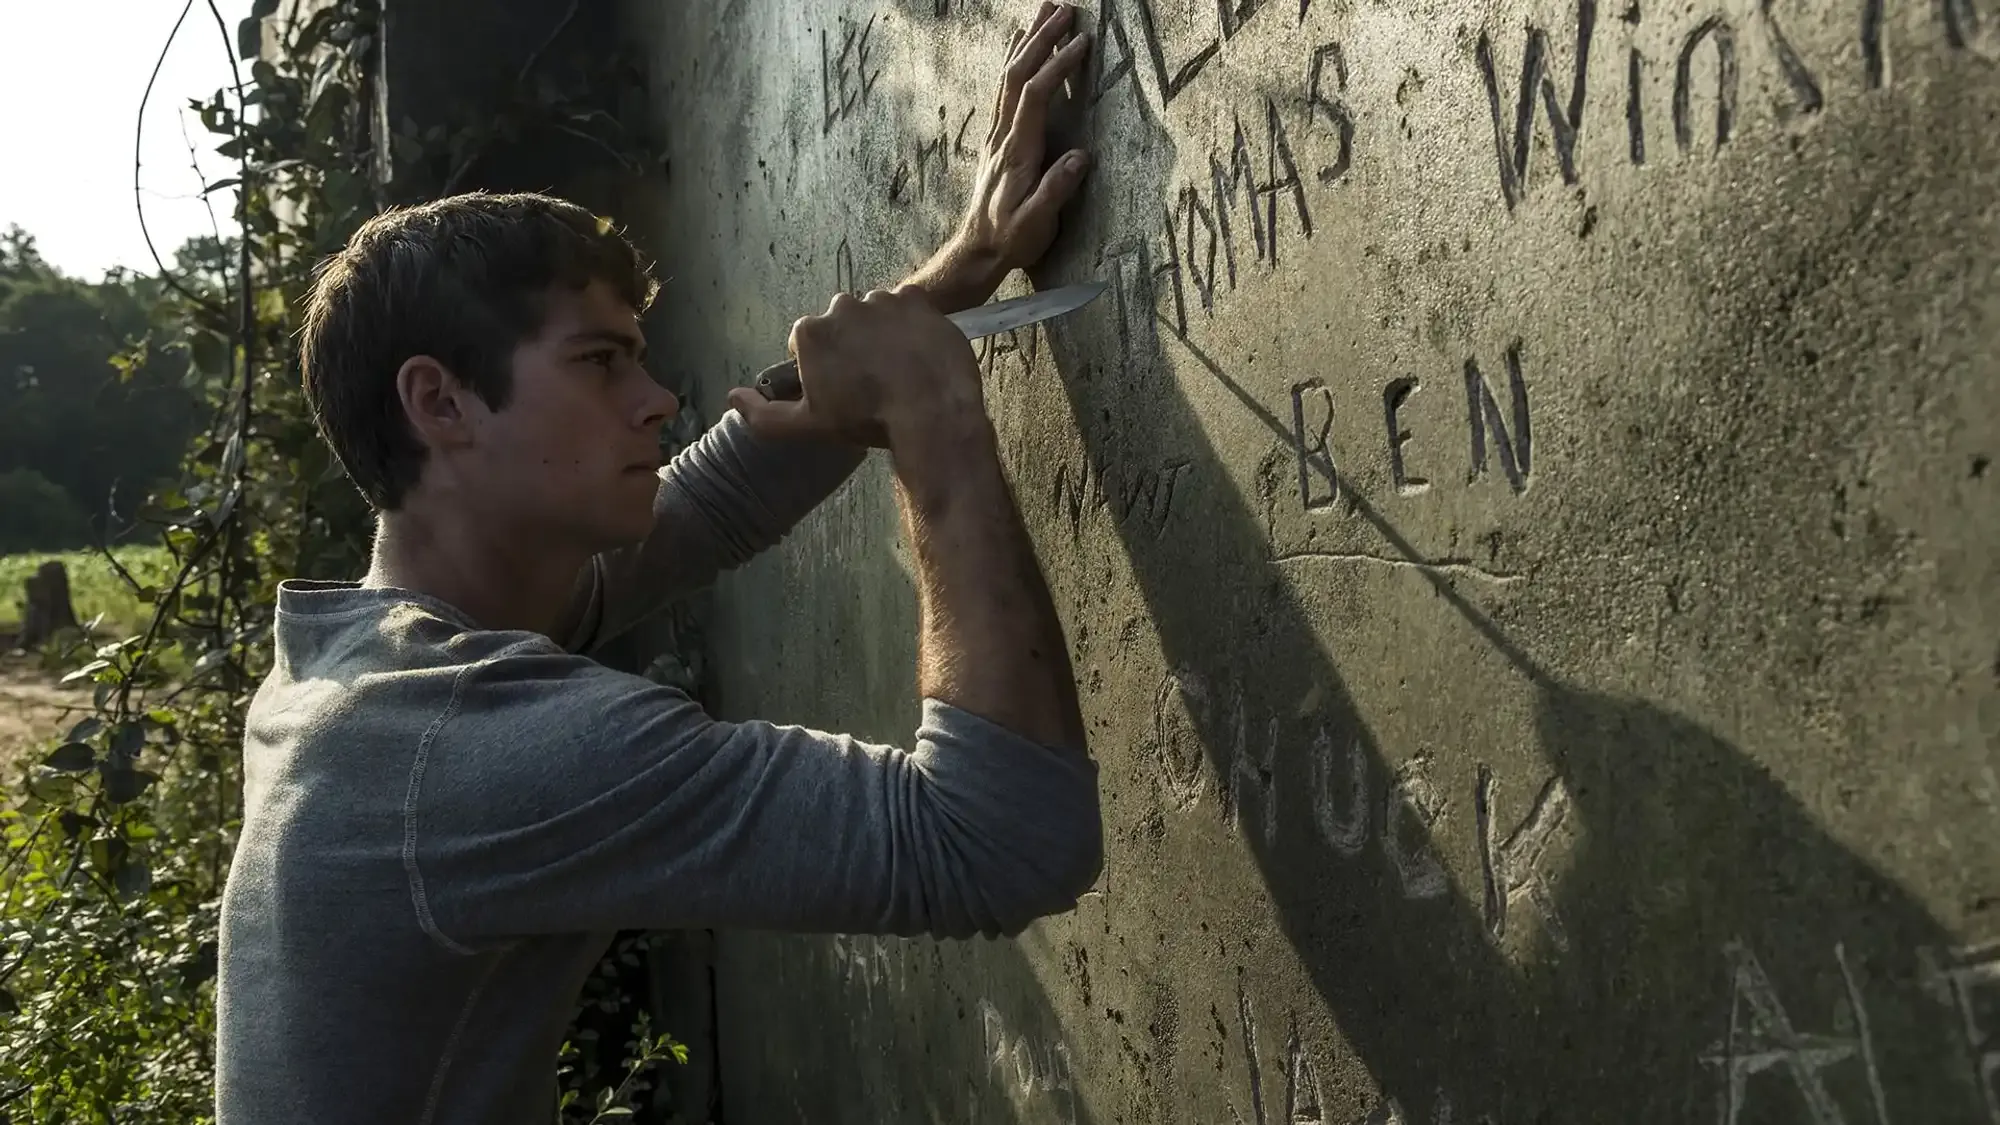 The Maze Runner movie review